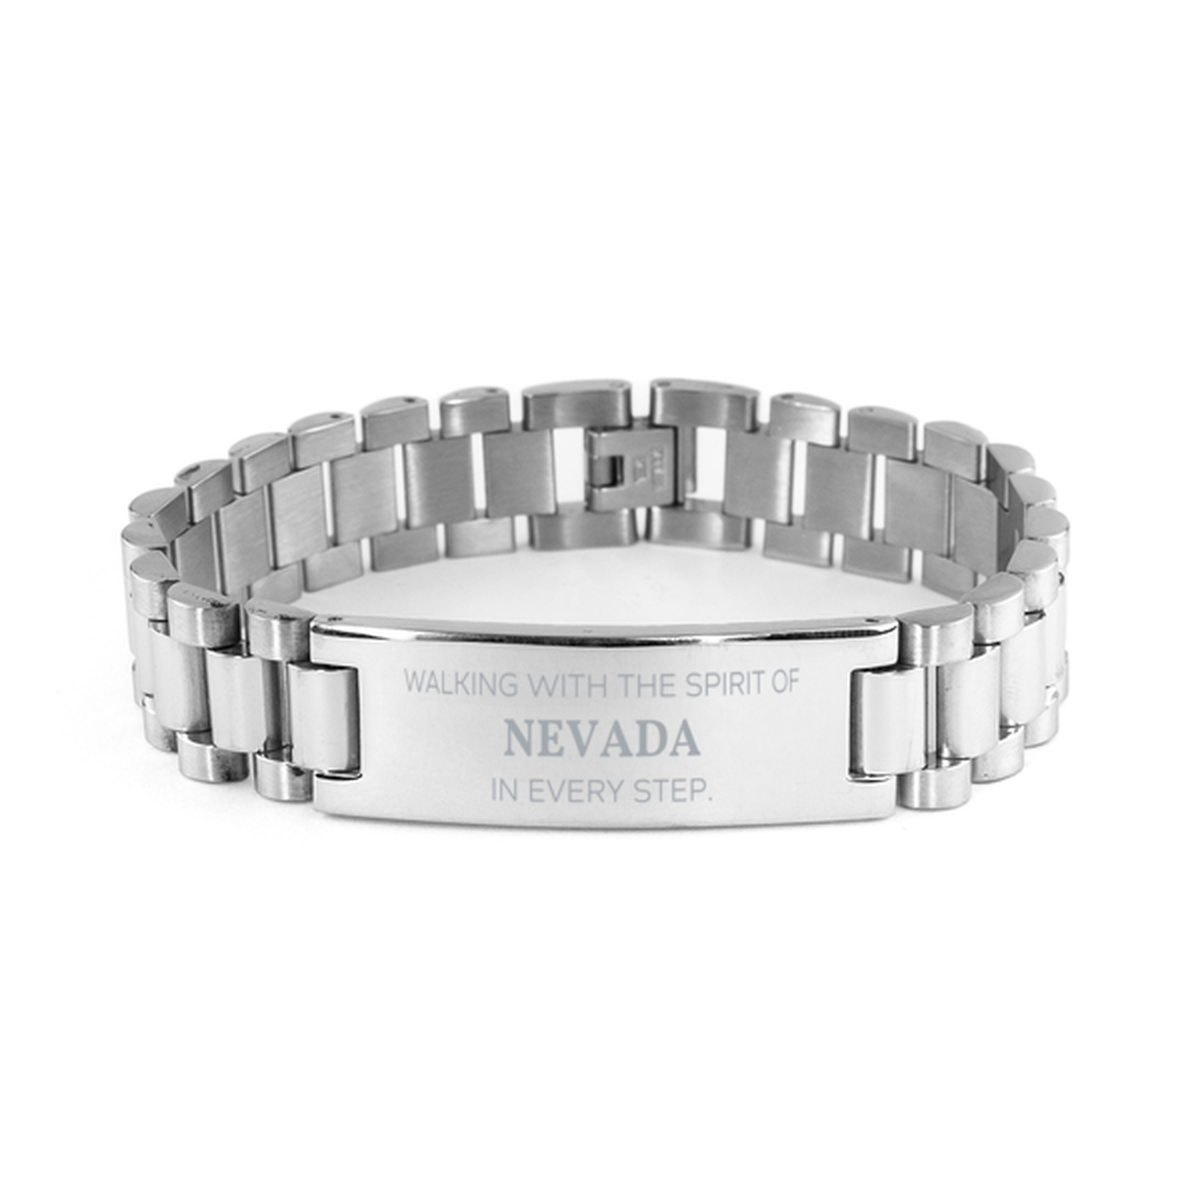 Nevada Gifts, Walking with the spirit, Love Nevada Birthday Christmas Ladder Stainless Steel Bracelet For Nevada People, Men, Women, Friends